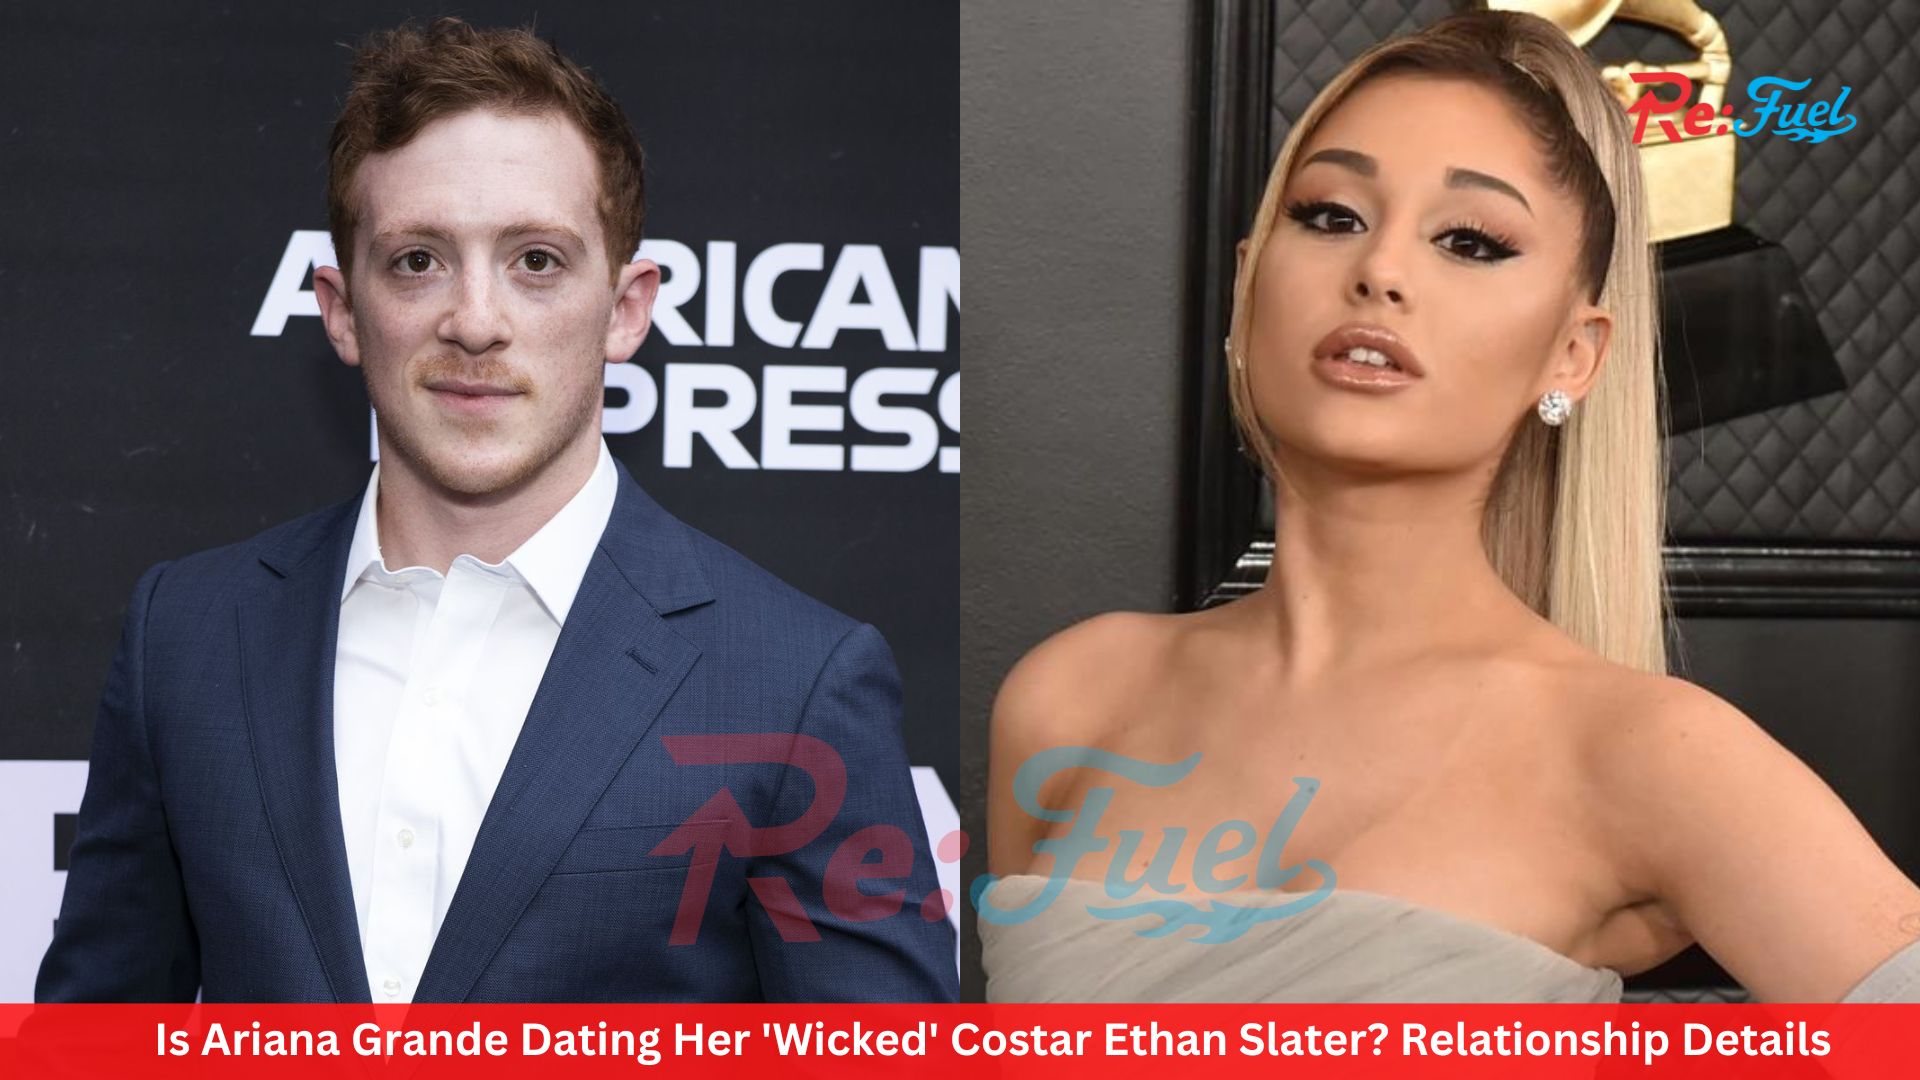 Is Ariana Grande Dating Her 'Wicked' Costar Ethan Slater? Relationship Details